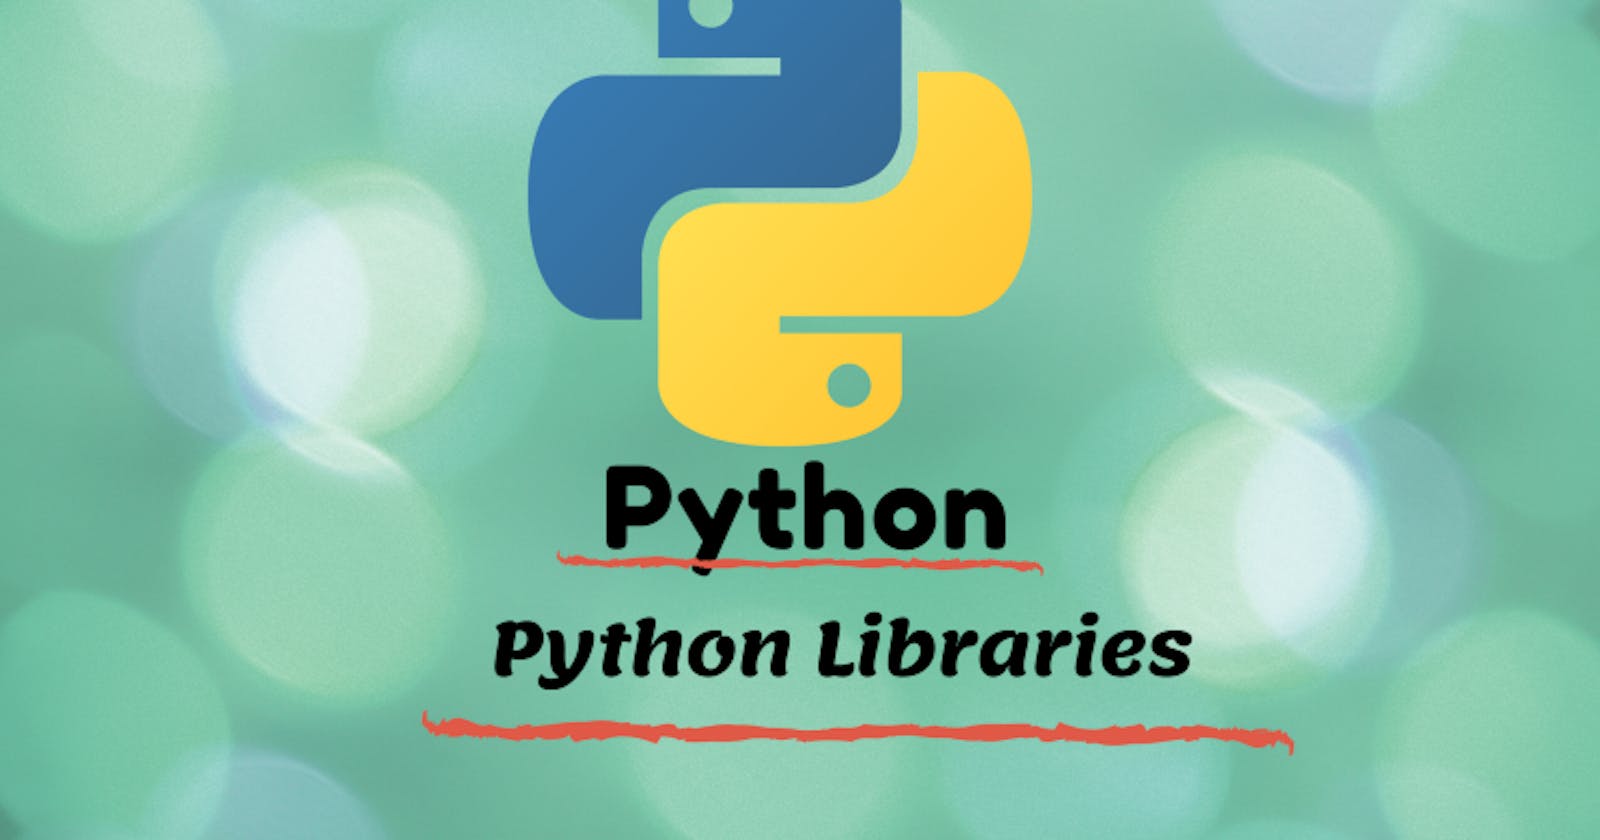 7 Unique and Underrated Python Libraries